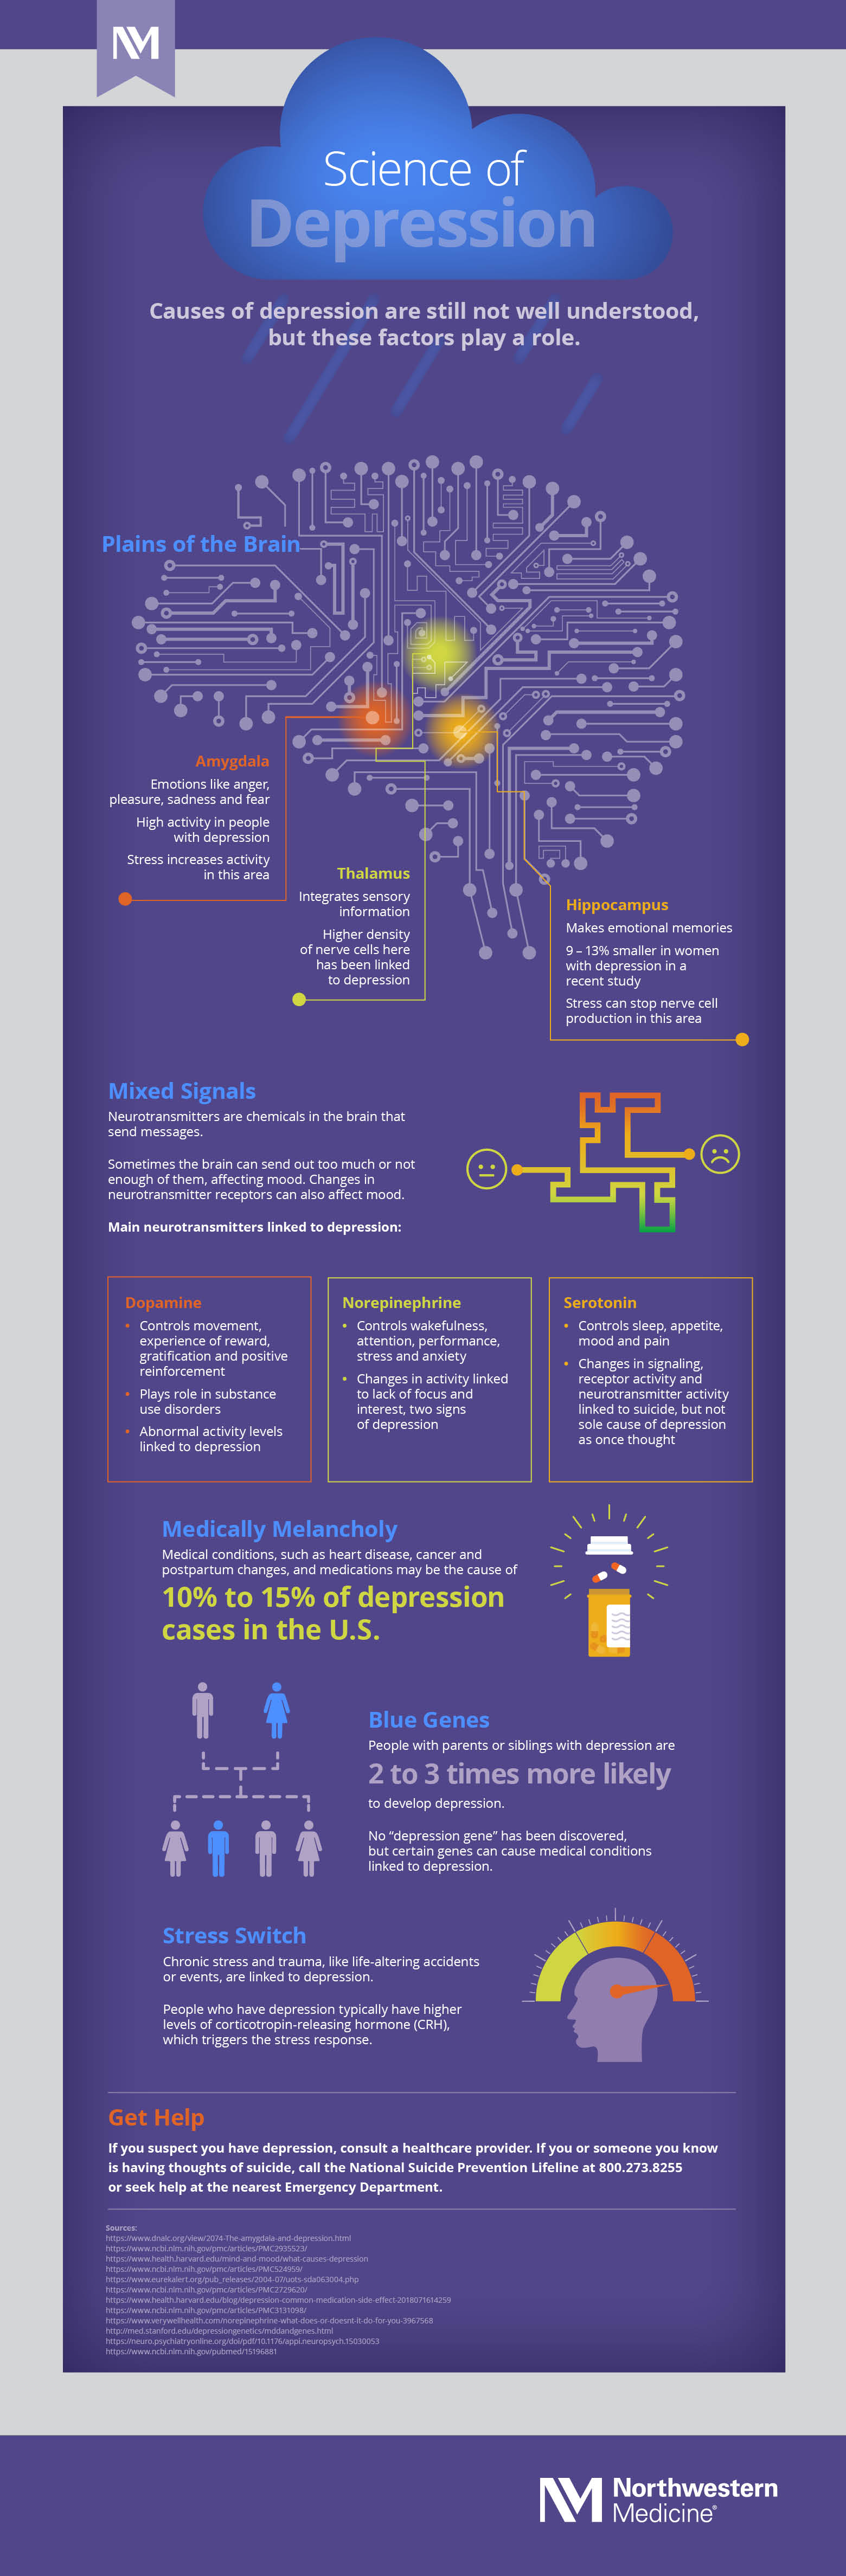 nm-science-of-depression_infographic